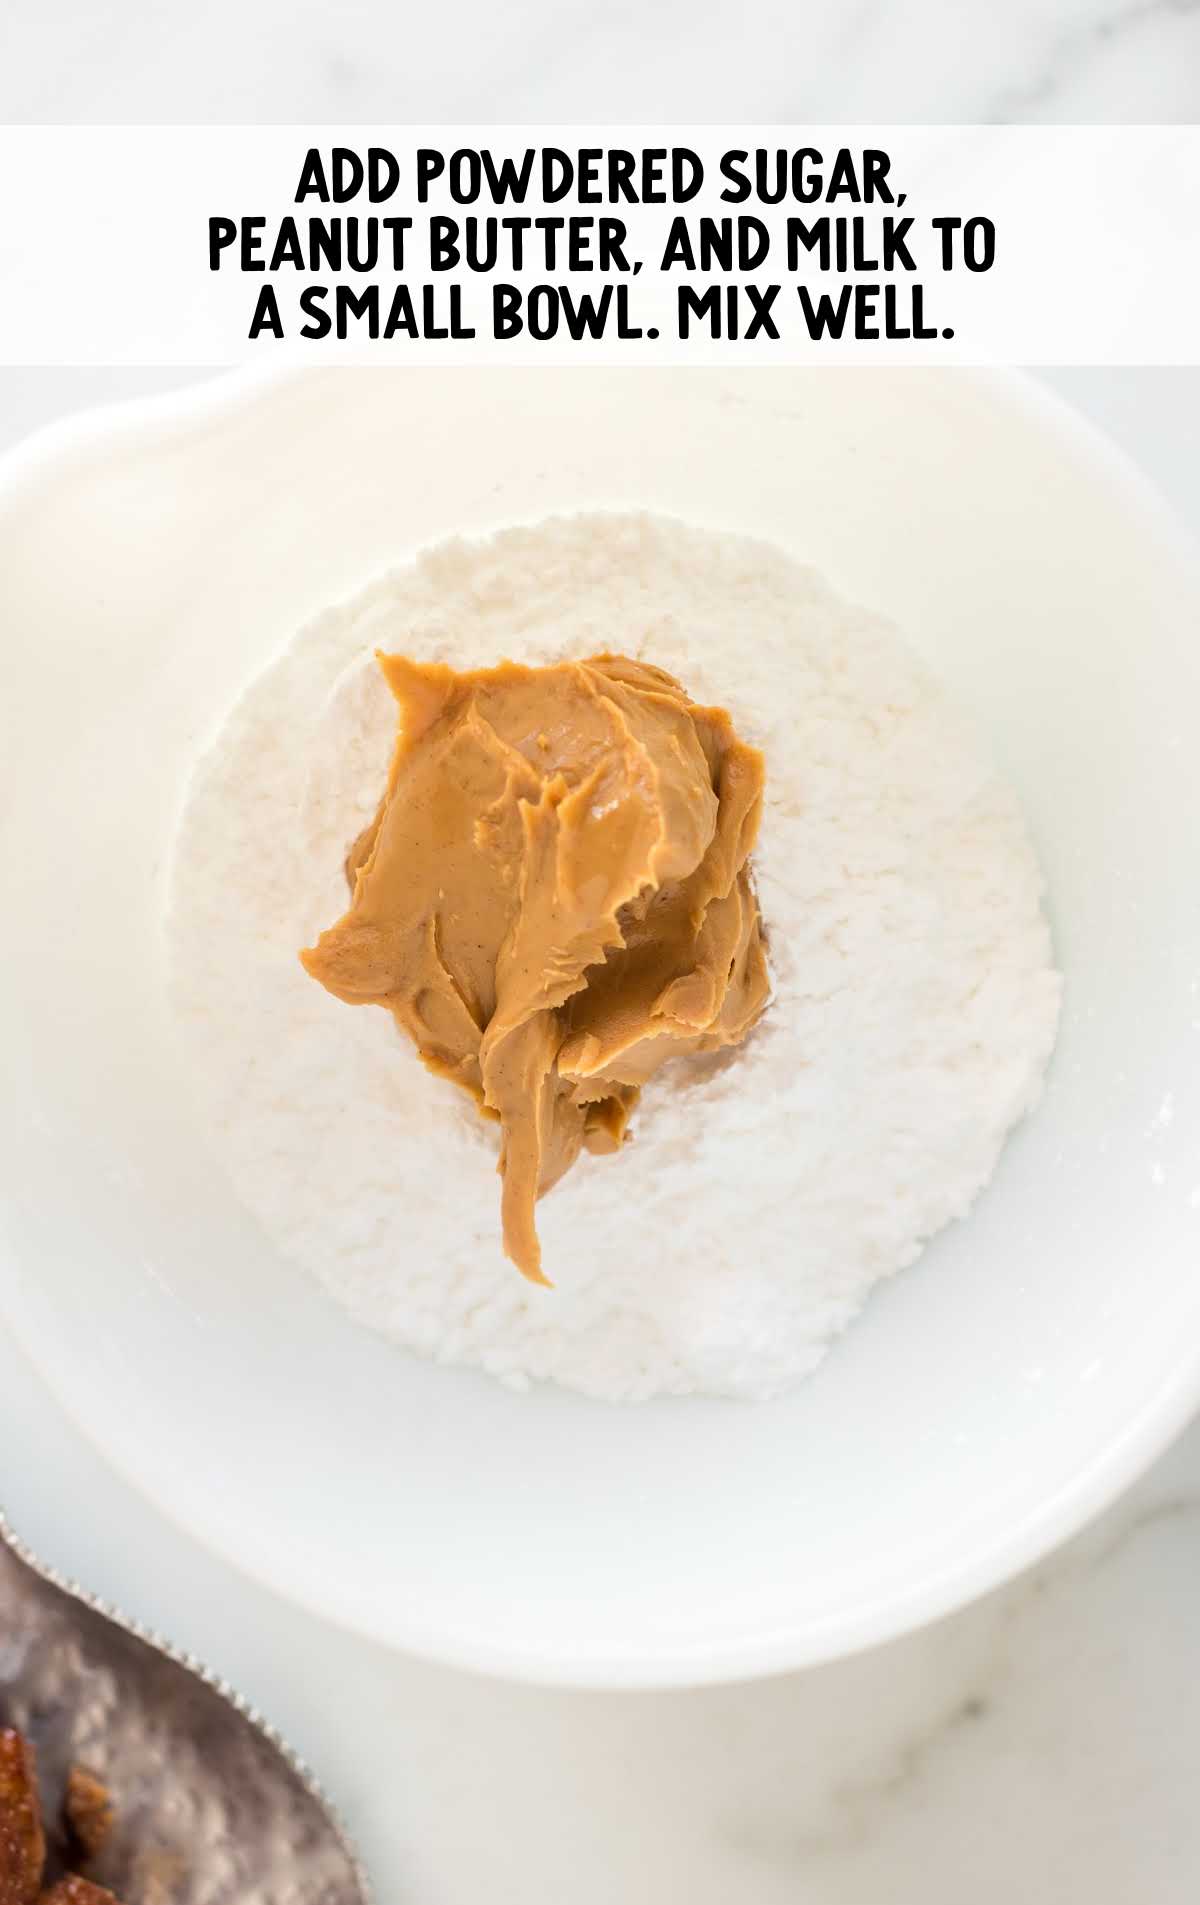 powdered sugar, peanut butter, and milk in a bowl